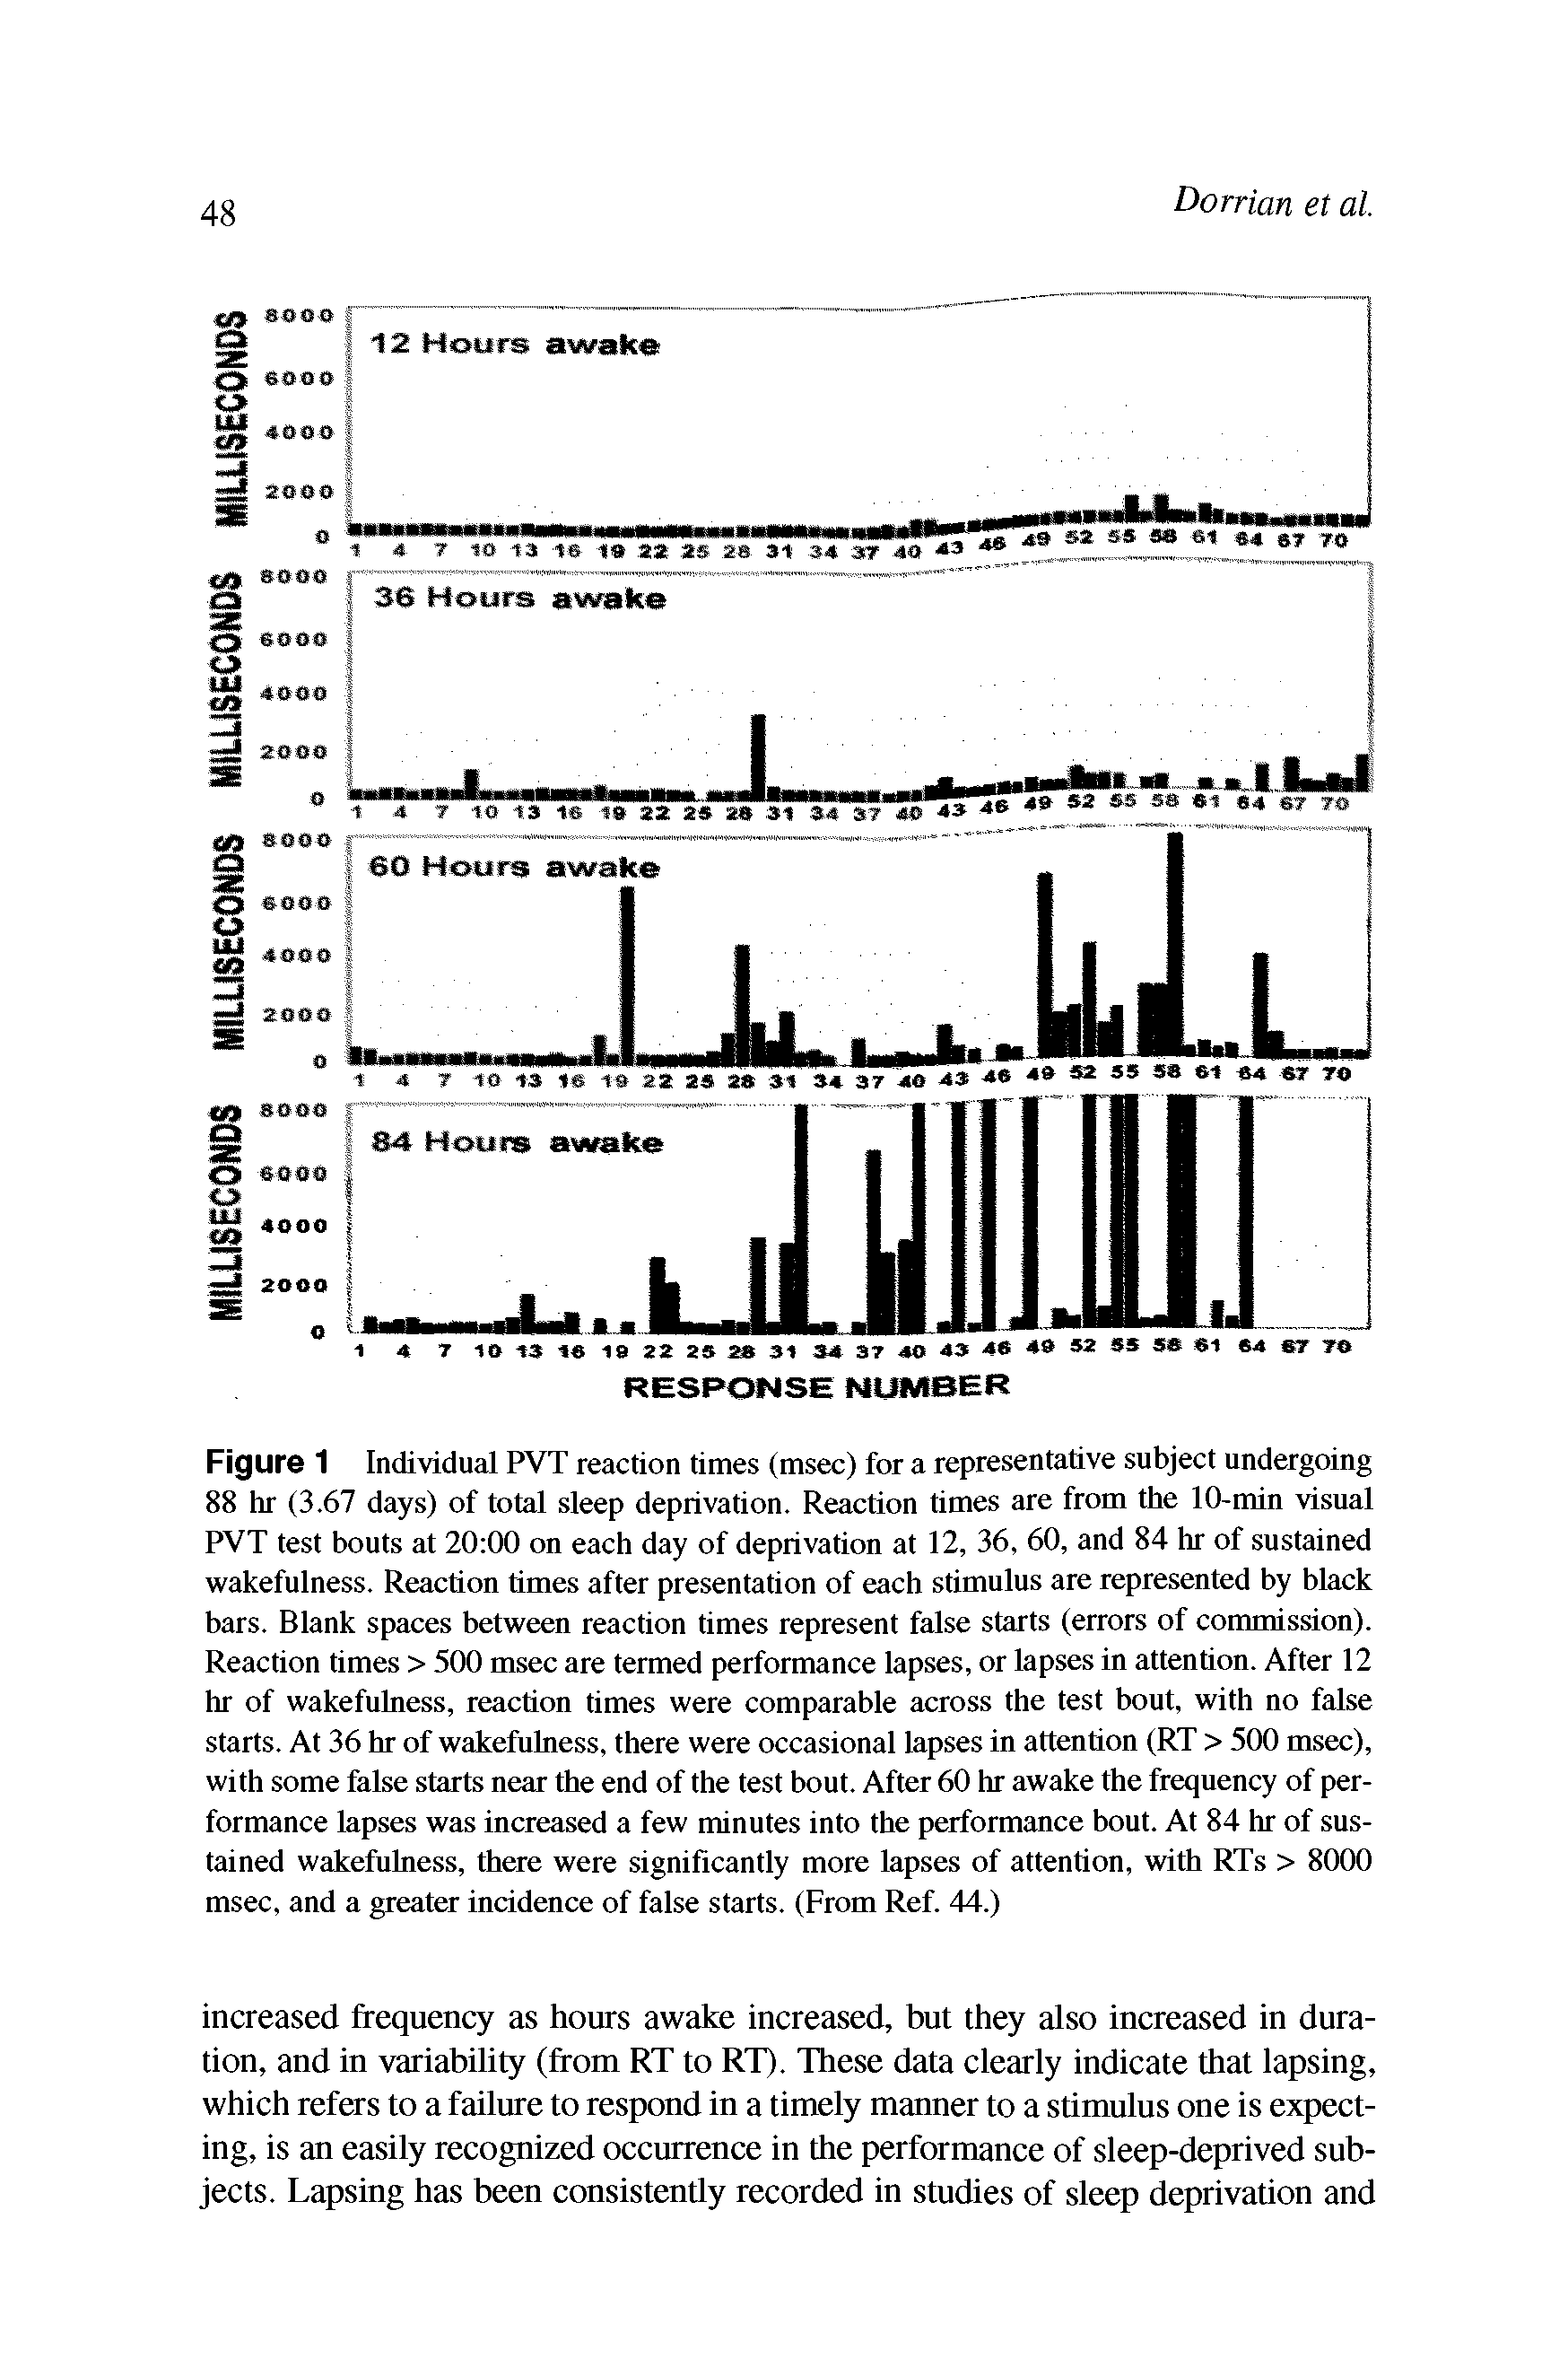 Figure 1 Individual PVT reaction times (msec) for a representative subject undergoing 88 hr (3.67 days) of total sleep deprivation. Reaction times are from the 10-min visual PVT test bouts at 20 00 on each day of deprivation at 12, 36, 60, and 84 hr of sustained wakefulness. Reaction times after presentation of each stimulus are represented by black bars. Blank spaces between reaction times represent false starts (errors of commission). Reaction times > 500 msec are termed performance lapses, or lapses in attention. After 12 hr of wakefulness, reaction times were comparable across the test bout, with no false starts. At 36 hr of wakefulness, there were occasional lapses in attention (RT > 500 msec), with some false starts near the end of the test bout. After 60 hr awake the frequency of performance lapses was increased a few minutes into the performance bout. At 84 hr of sustained wakefulness, there were significantly more lapses of attention, with RTs > 8000 msec, and a greater incidence of false starts. (From Ref. 44.)...